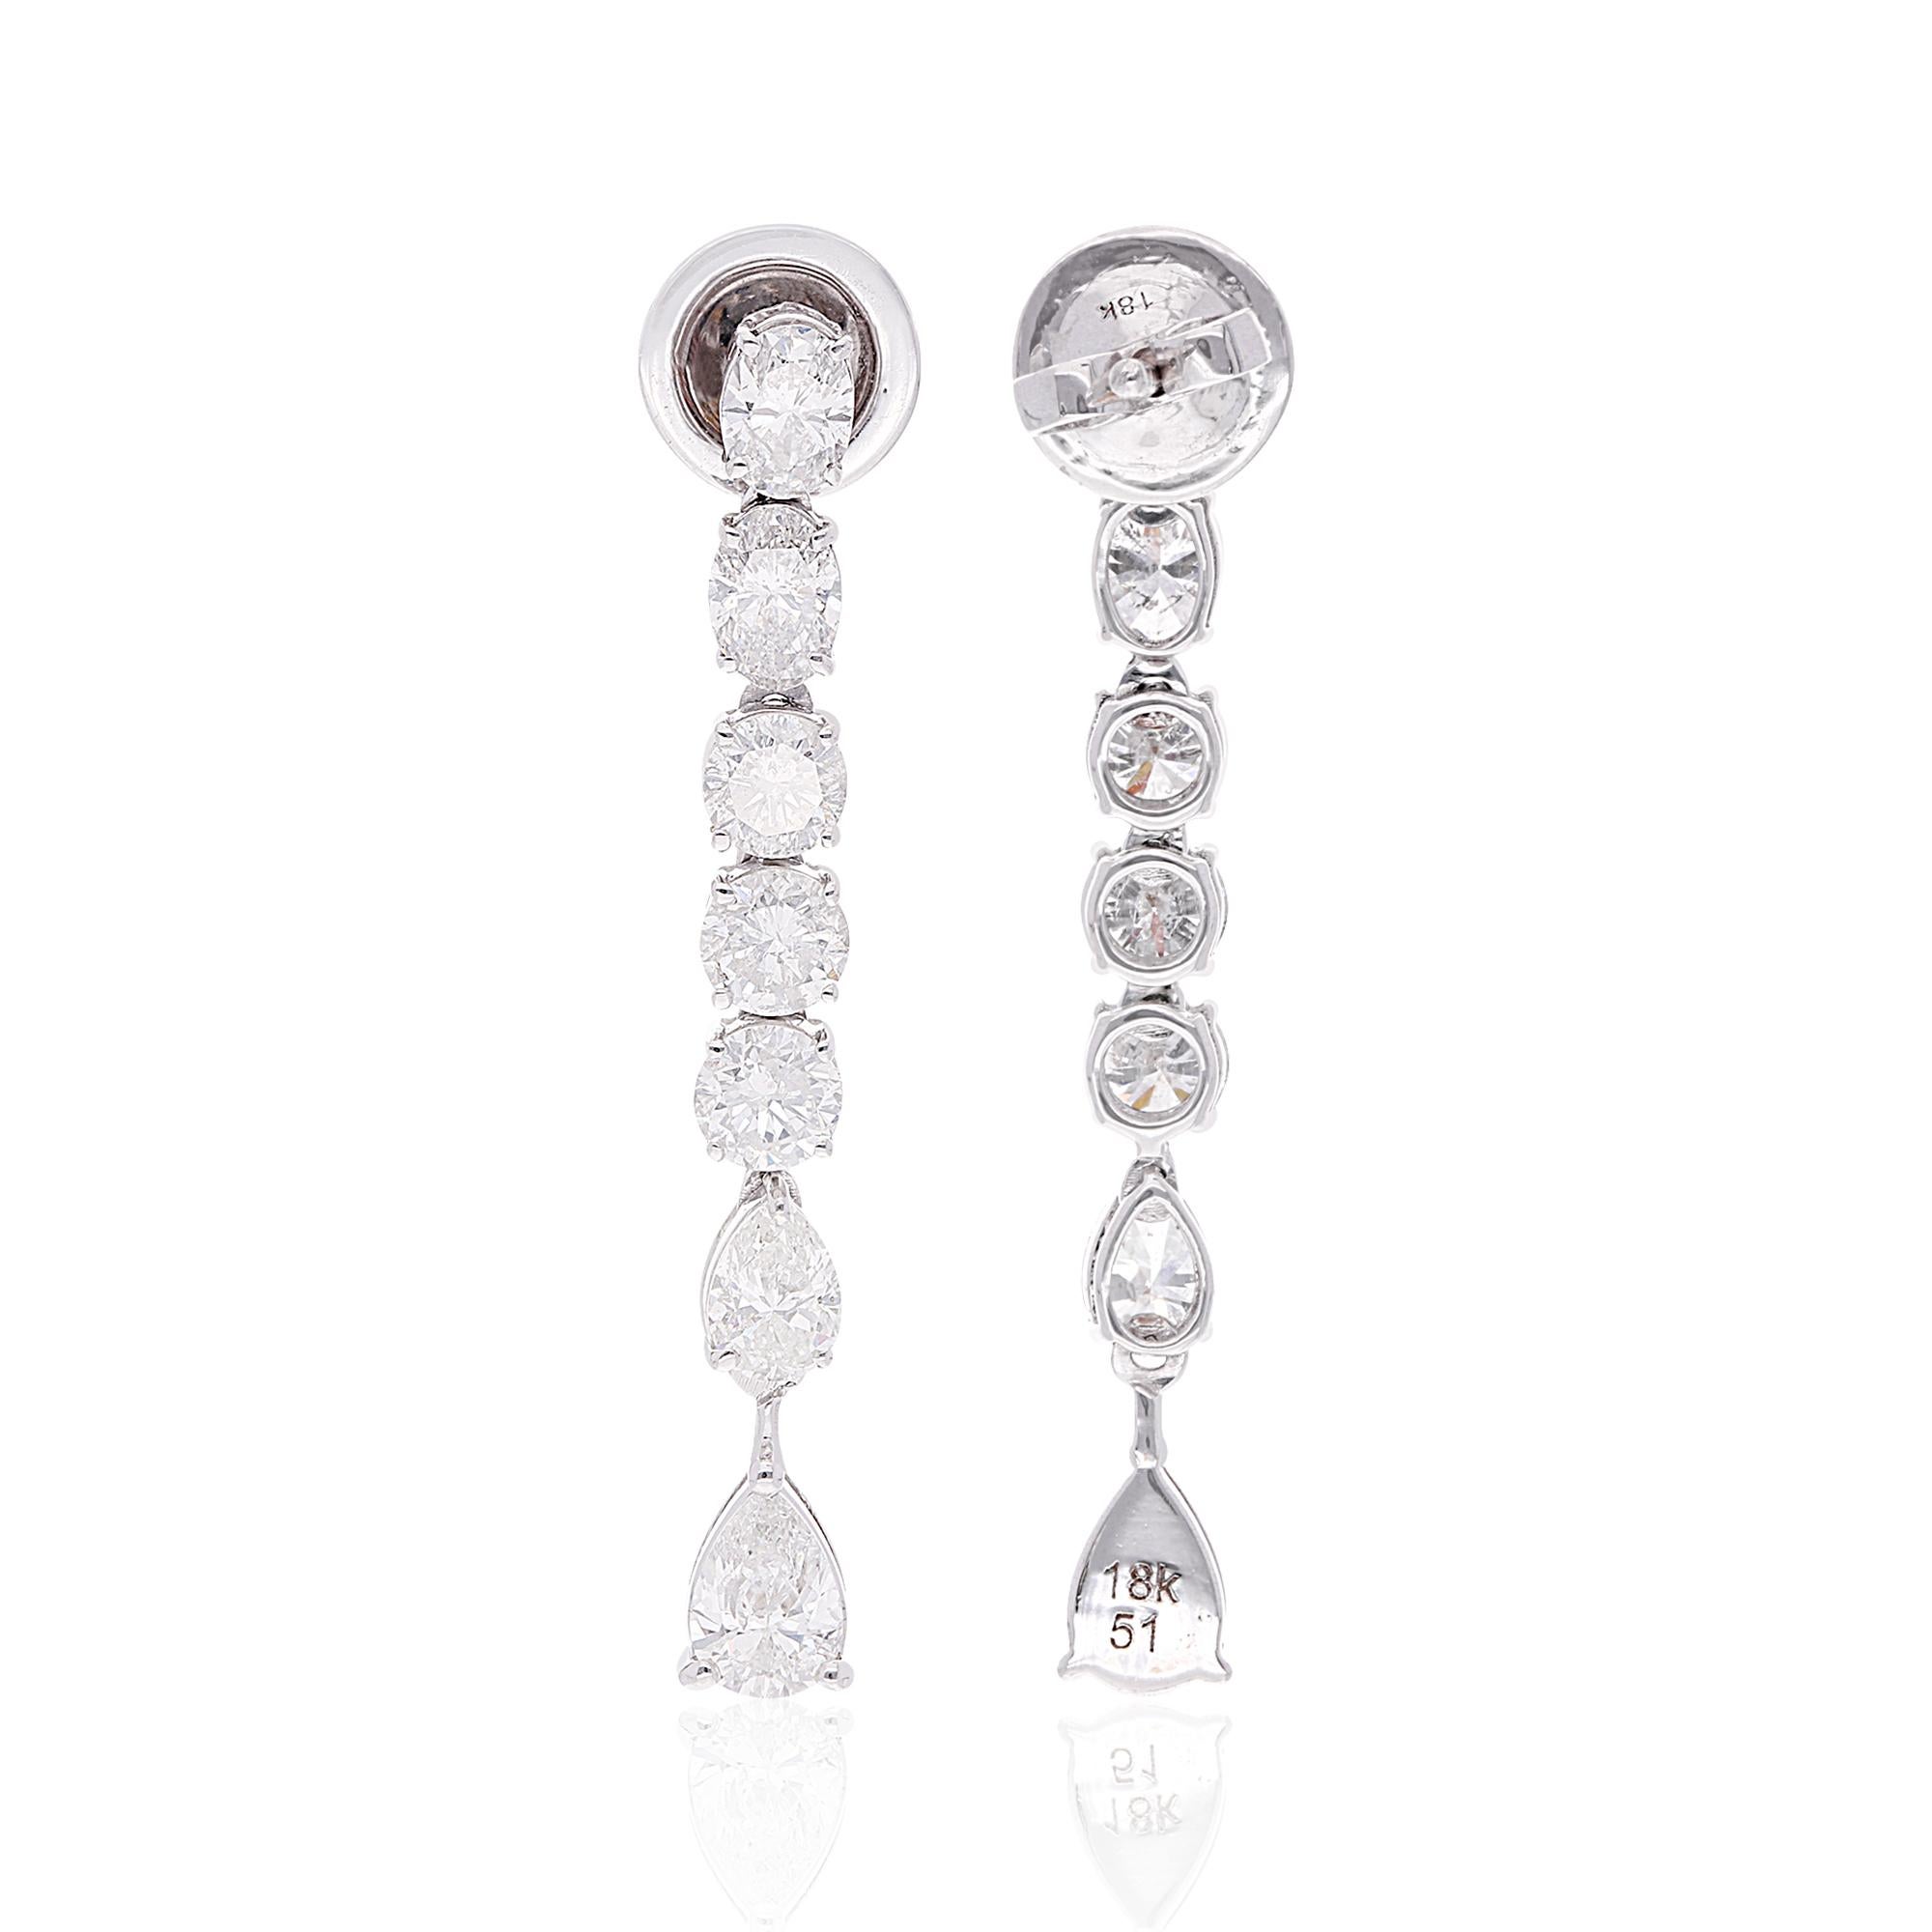 Make yourself trendy and stylish with this 18k White Gold Earrings glittering with Diamond that will add majestic charm and elegance to your look. Exquisitely designed, this Earrings will provide you a classy look.

✧✧Welcome To Our Shop Spectrum